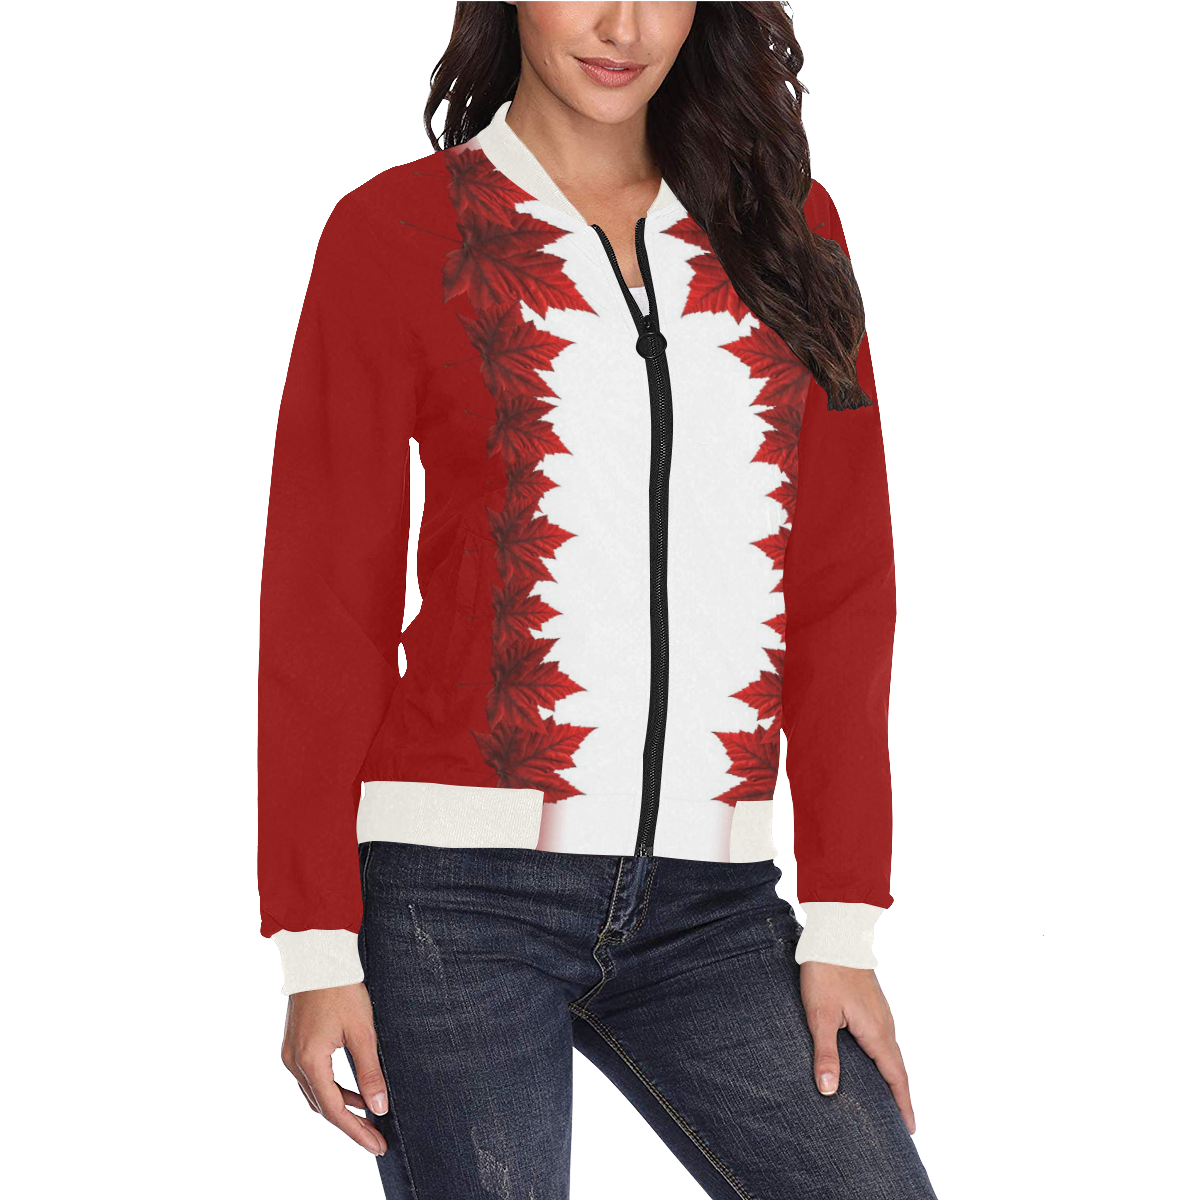 Canada Maple Leaf Jackets All Over Print Bomber Jacket for Women (Model H36)